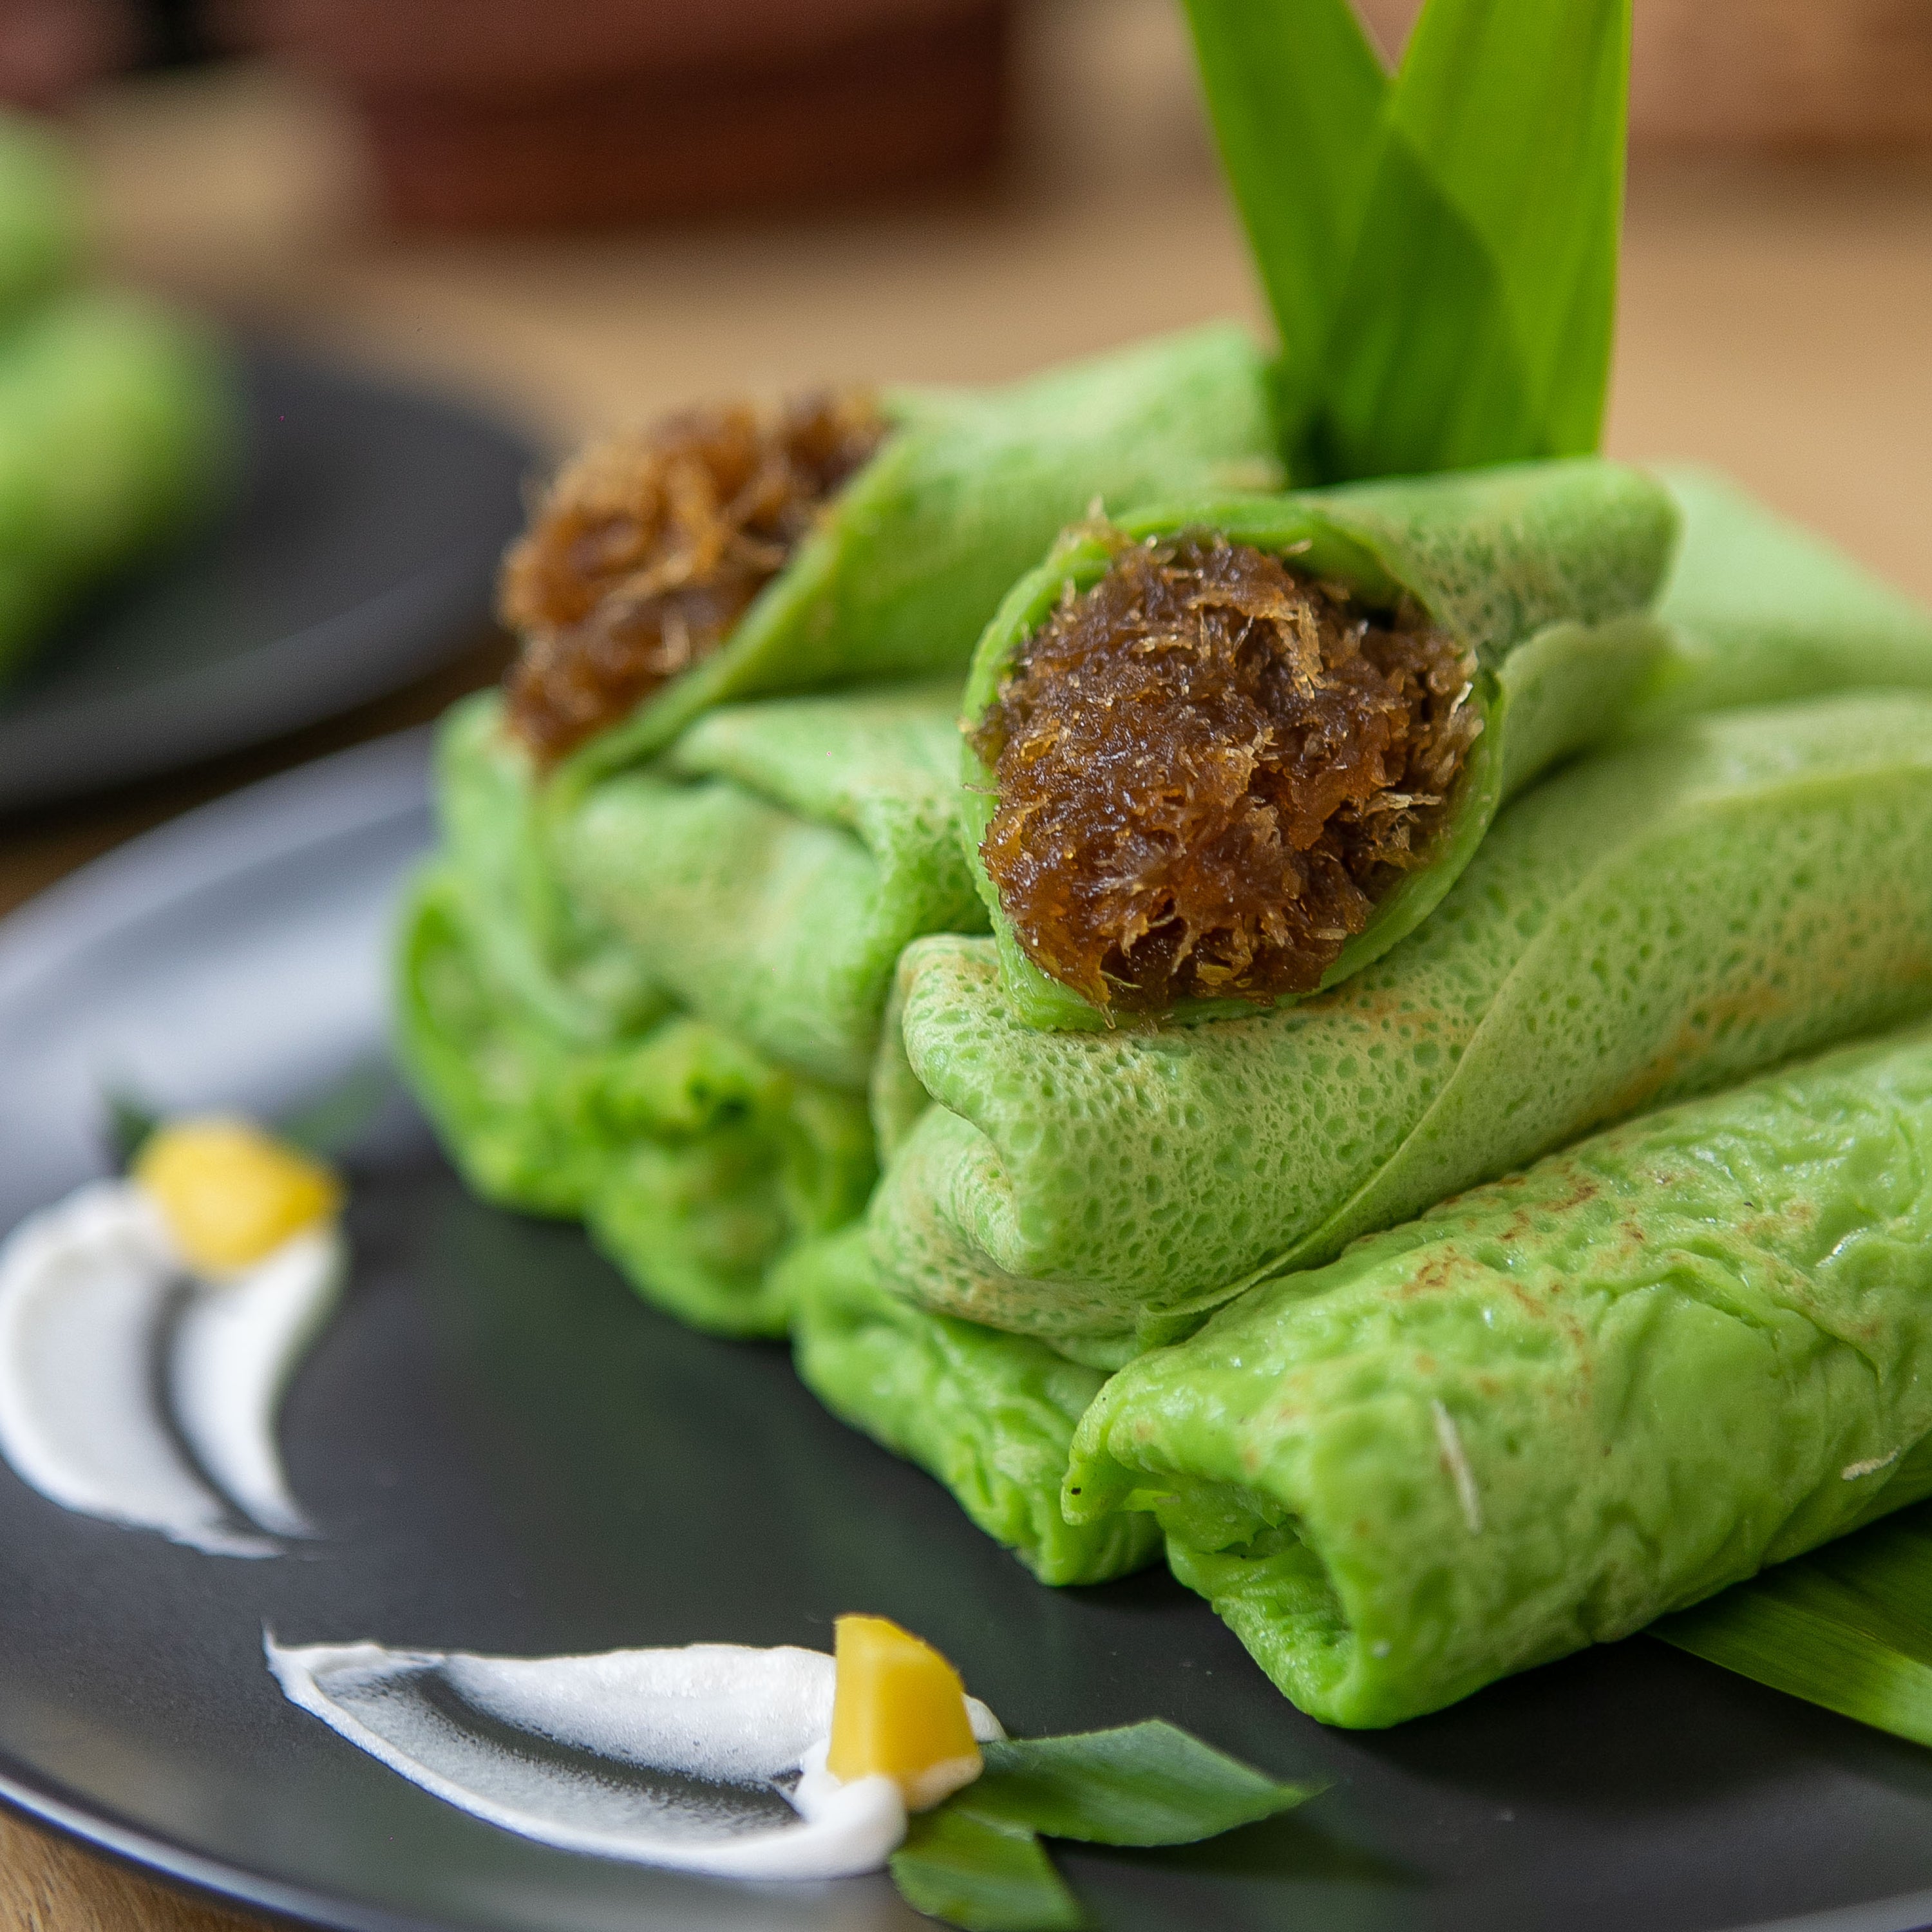 Gluten free Dadar Gulung - Traditional Indonesian Pancakes filled with shredded coconut